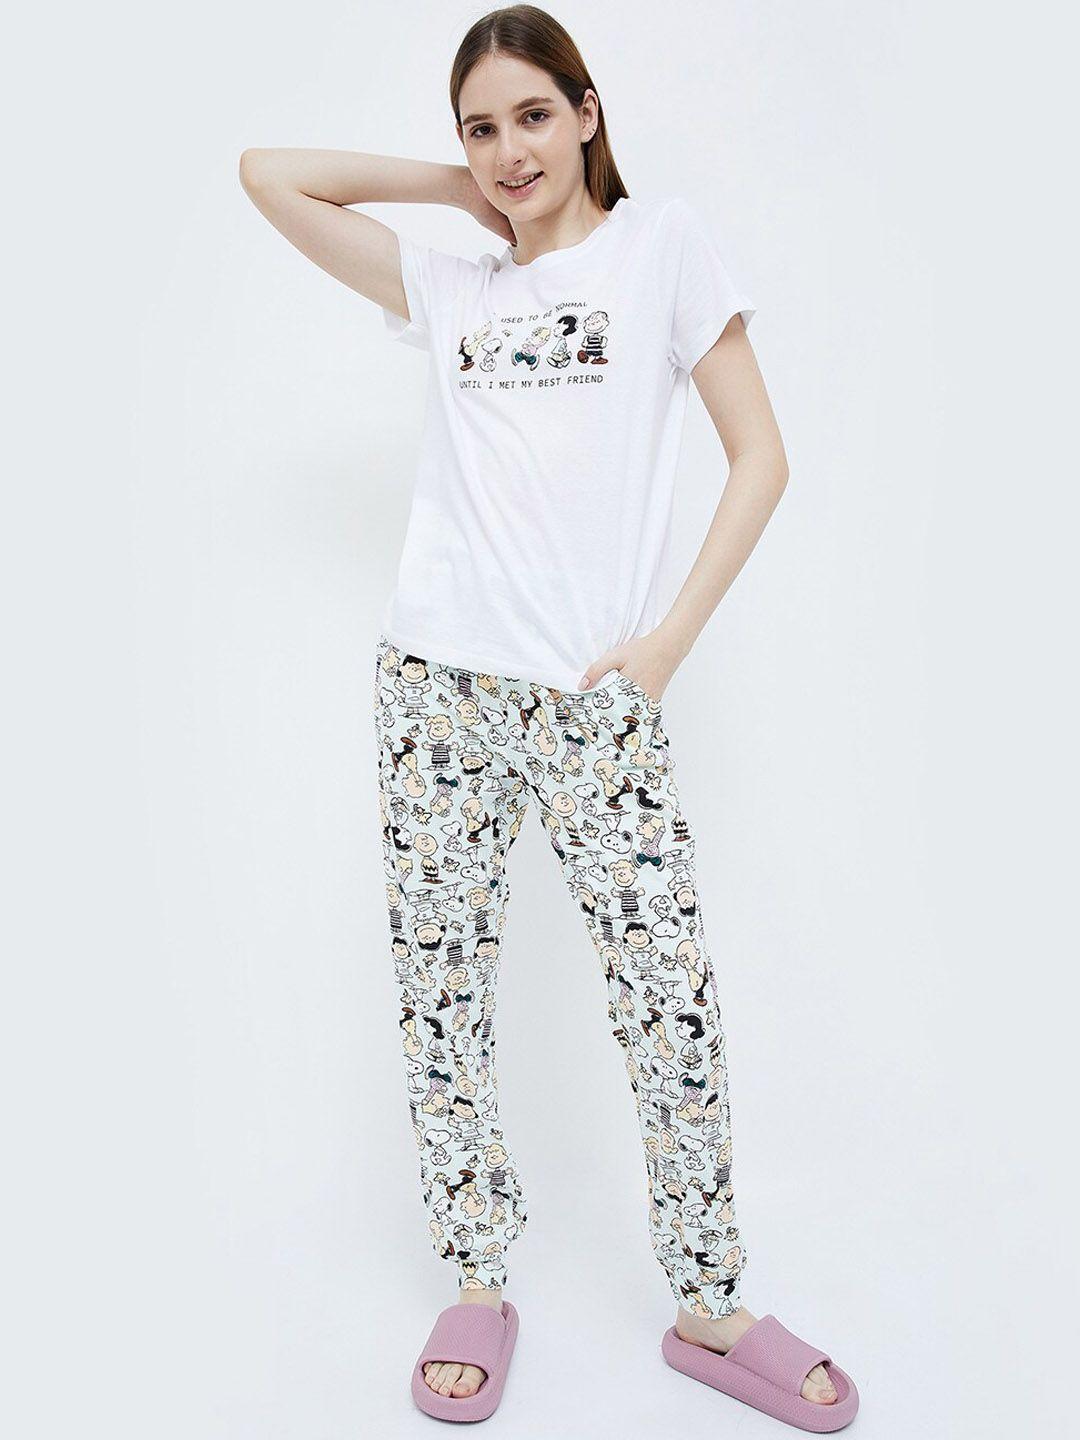 ginger-by-lifestyle-snoopy-printed-pure-cotton-night-suit